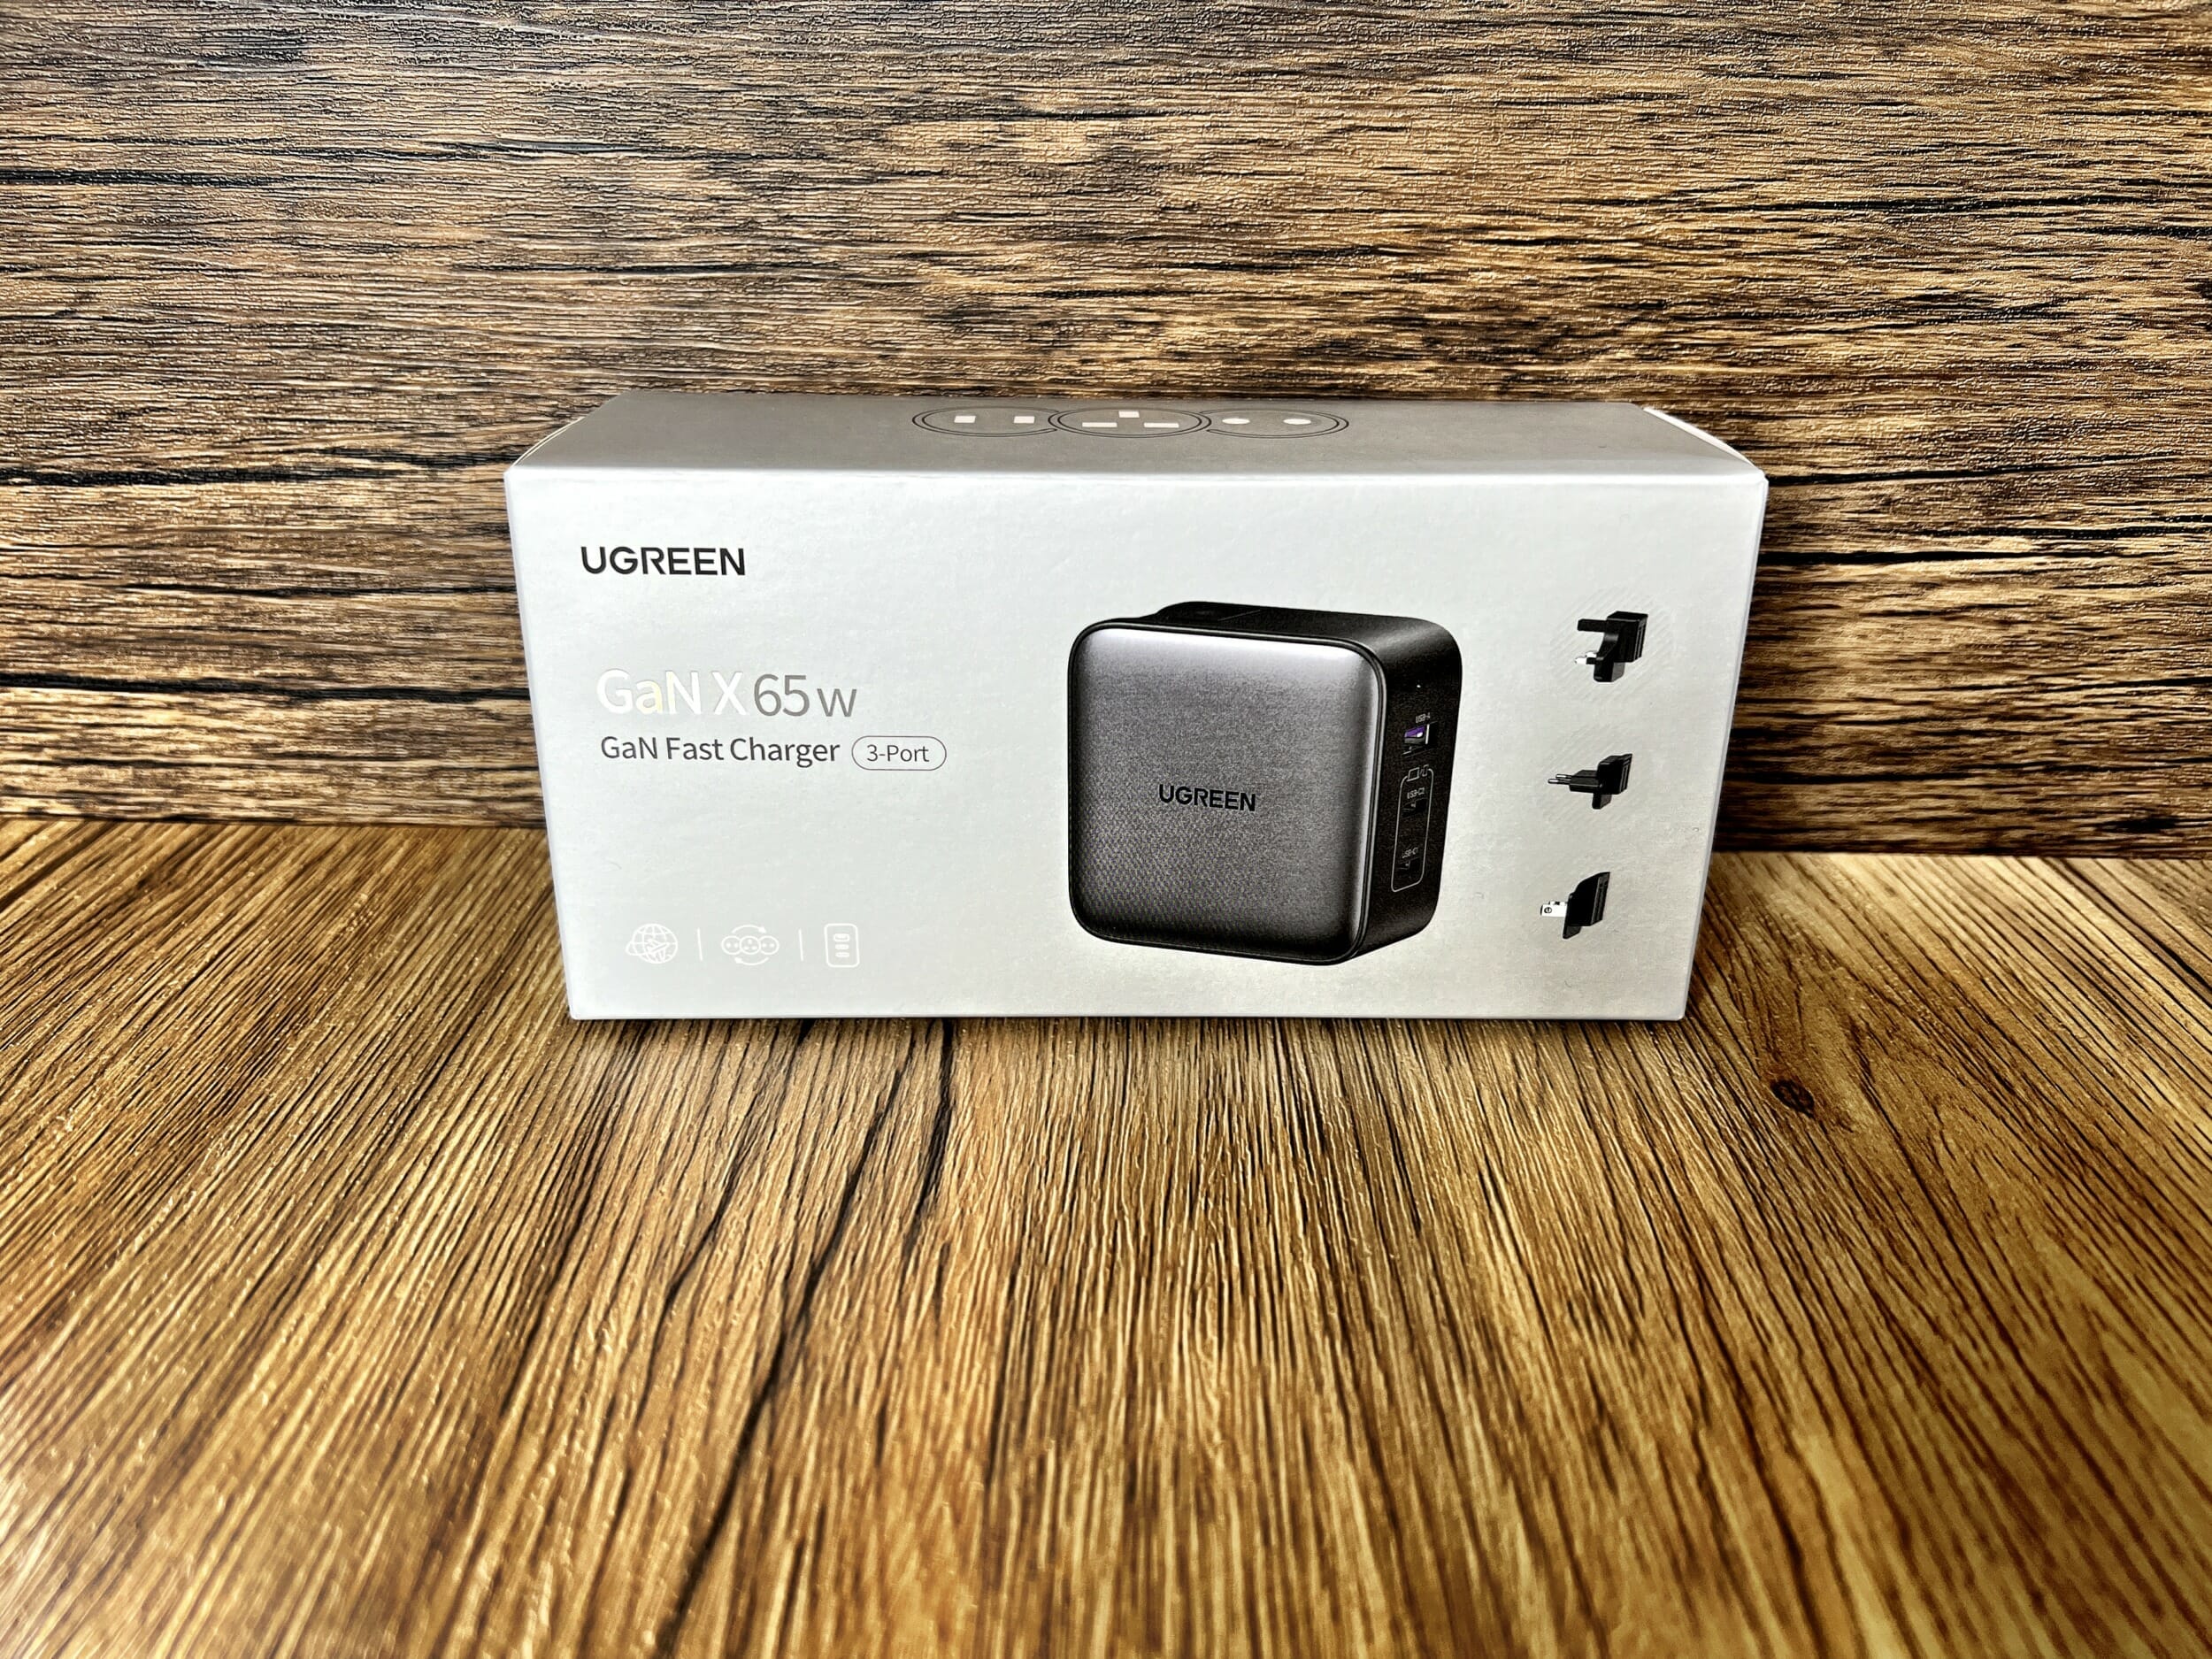 UGreen GAN X 65W Charger Review: Type-C Charging Is The Future!